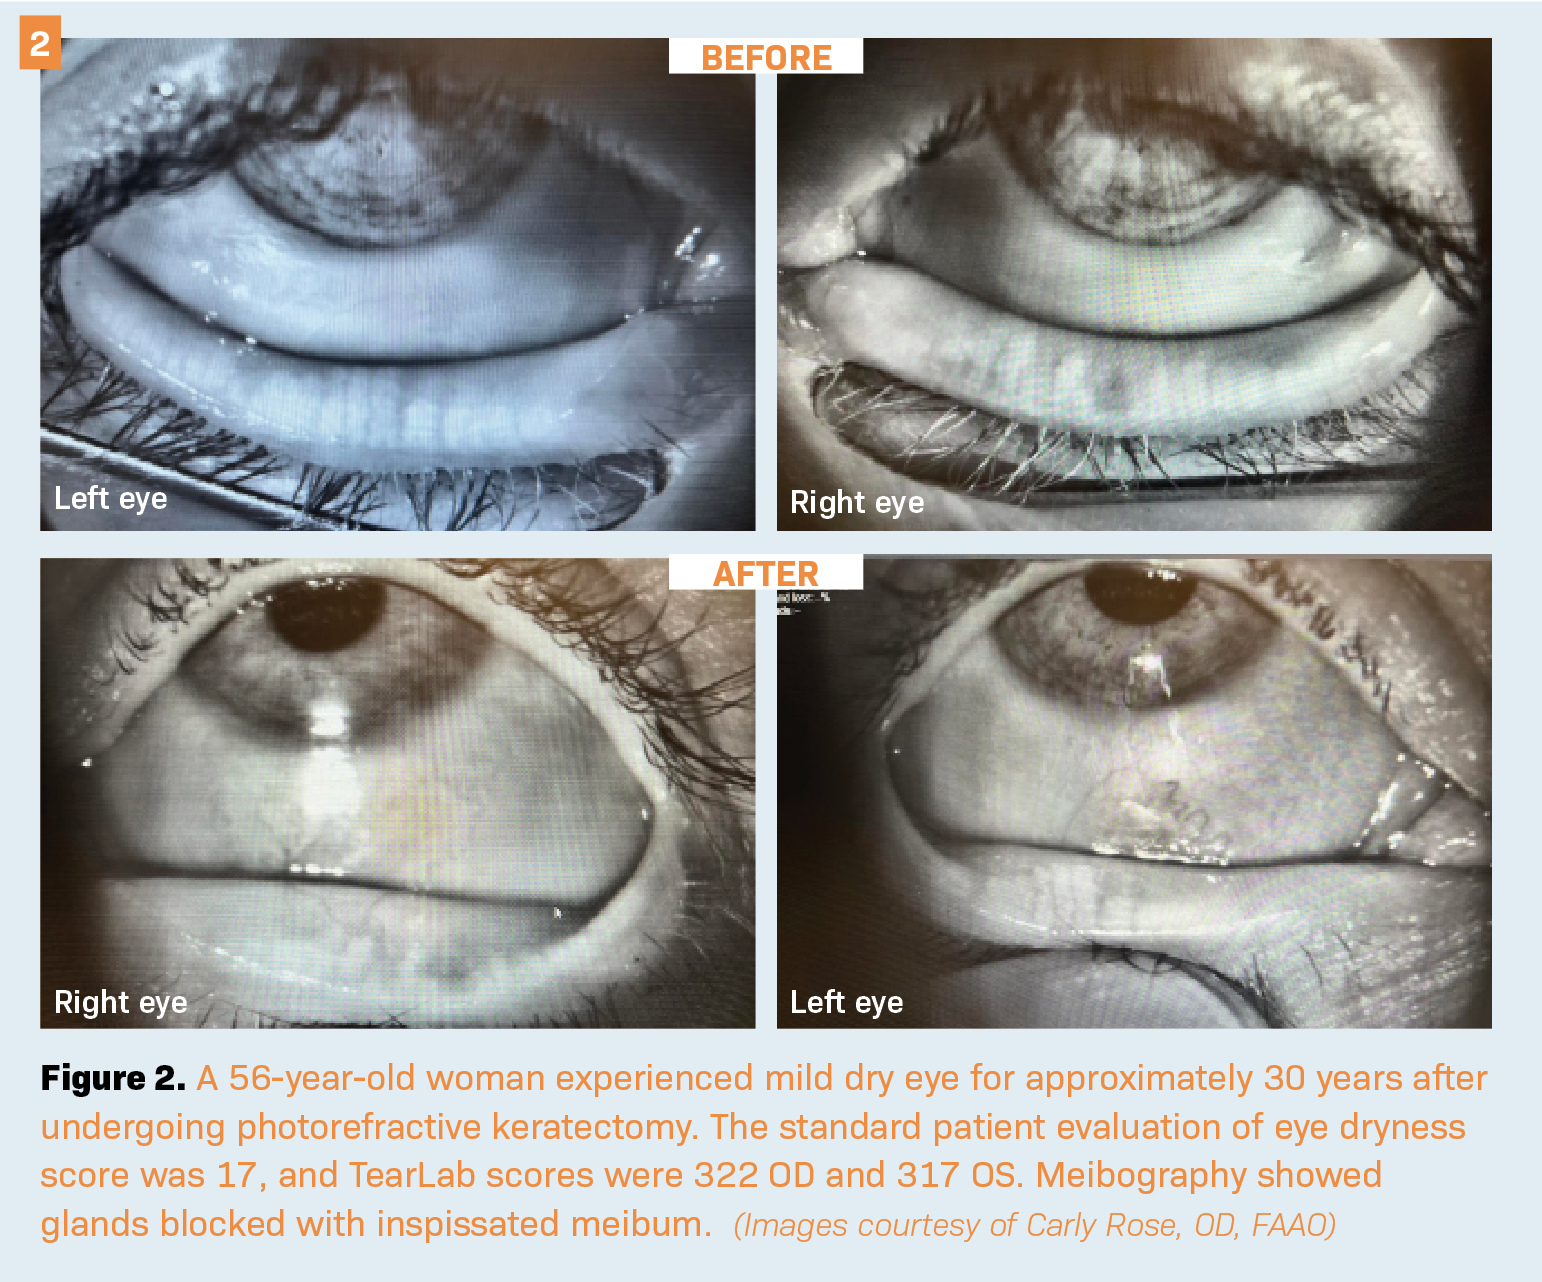 A 56-year-old woman experienced mild dry eye for approximately 30 years after undergoing photorefractive keratectomy. The standard patient evaluation of eye dryness score was 17, and TearLab scores were 322 OD and 317 OS. Meibography showed glands blocked with inspissated meibum.  (Images courtesy of Carly Rose, OD, FAAO)